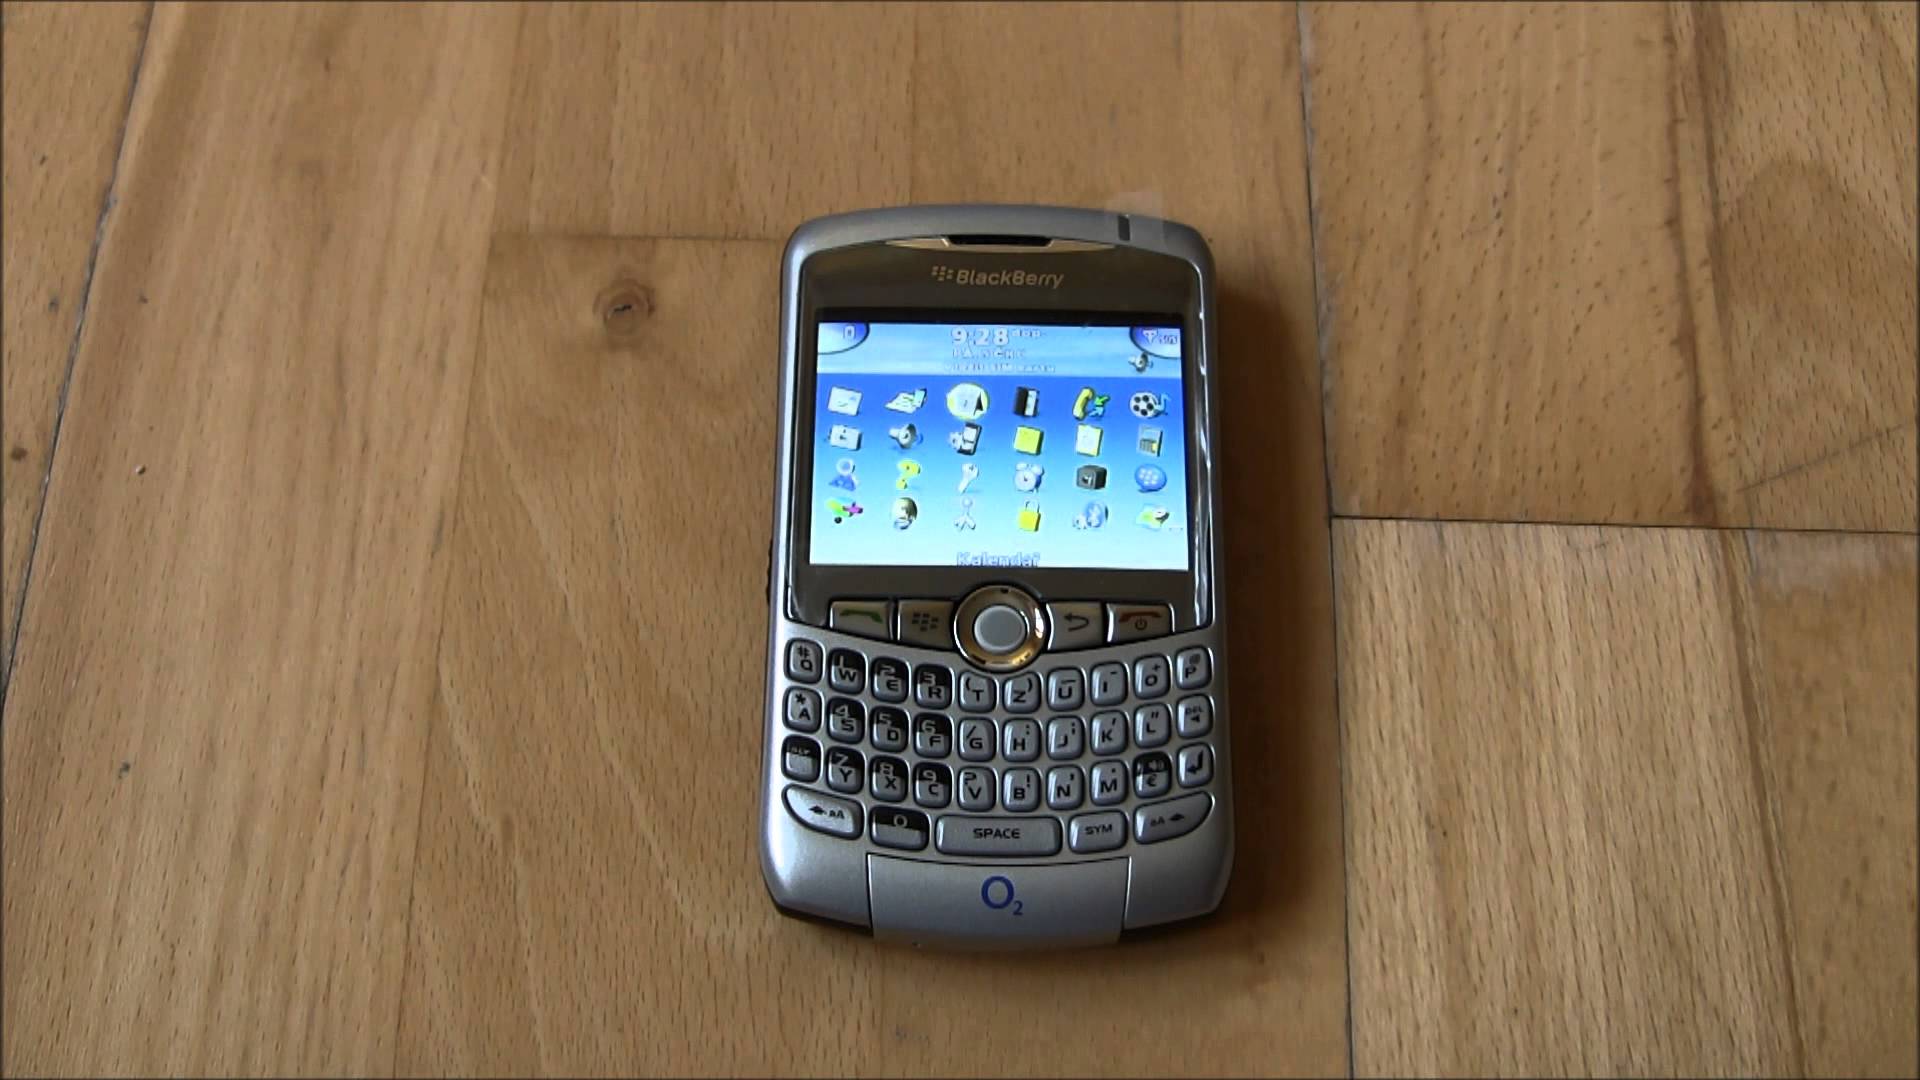 BlackBerry 8310 Curve - old phone with luxury keyboard - YouTube